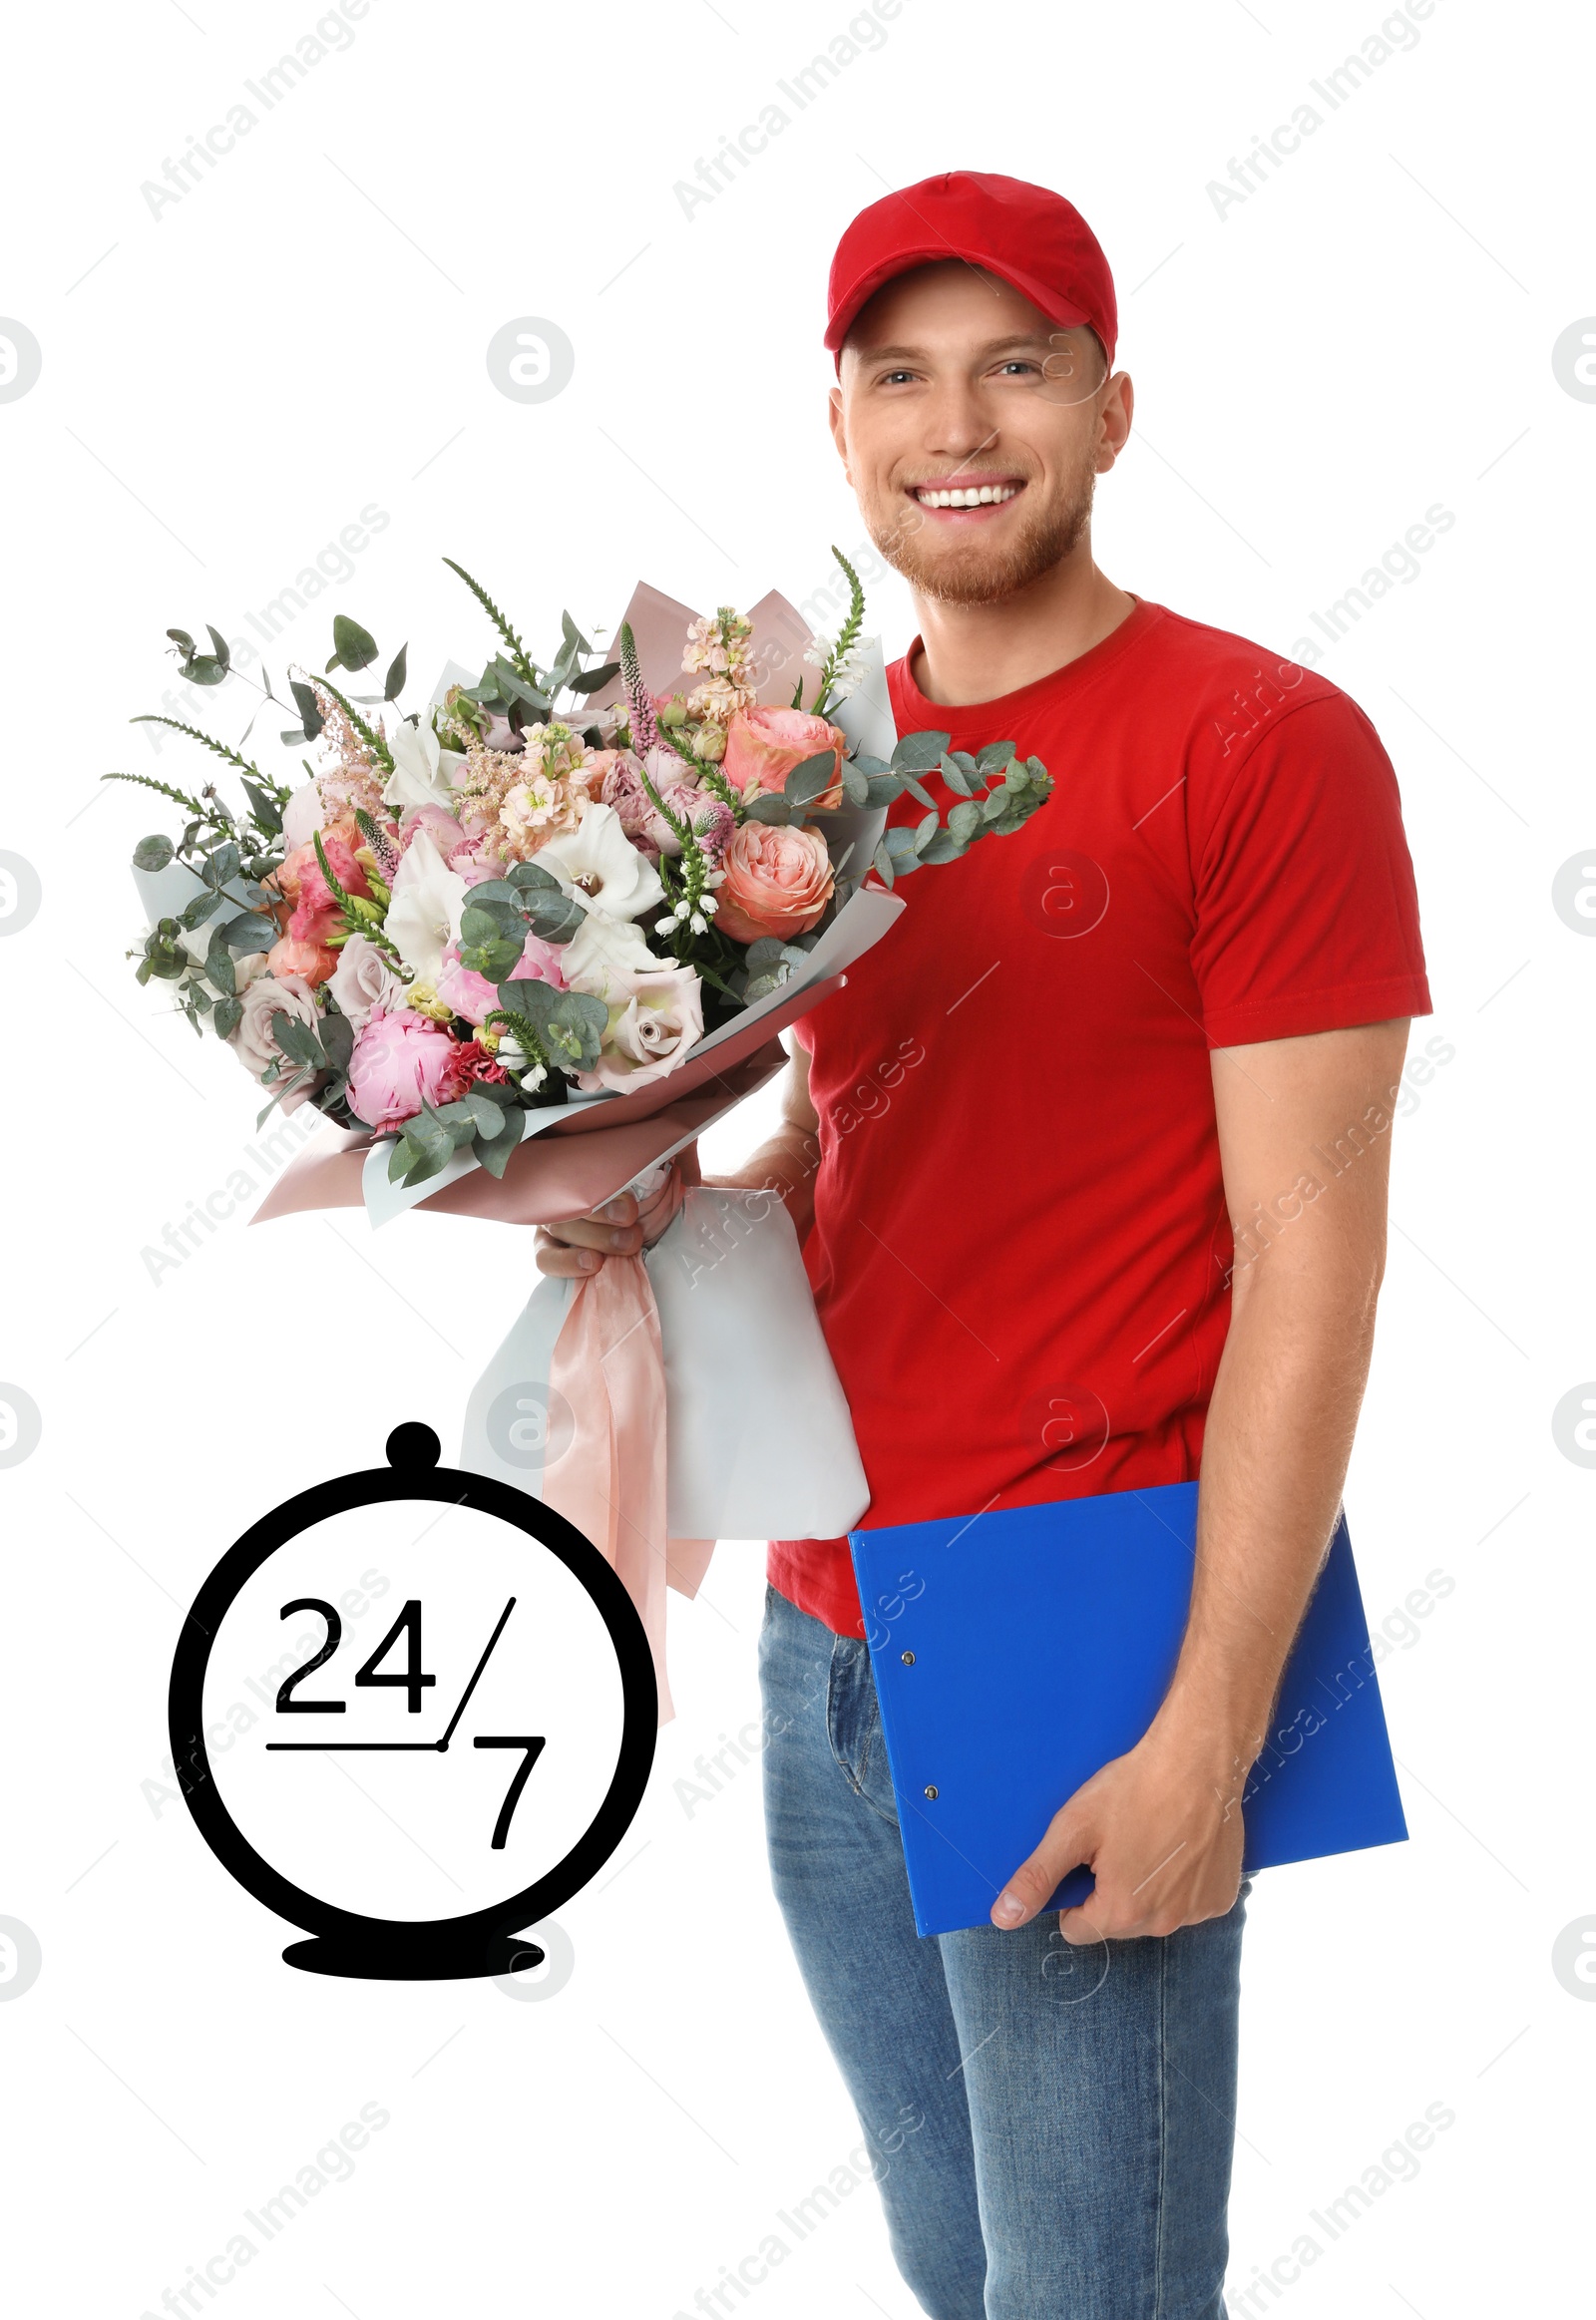 Image of 24/7 service. Delivery man with beautiful flower bouquet on white background. Illustration of clock